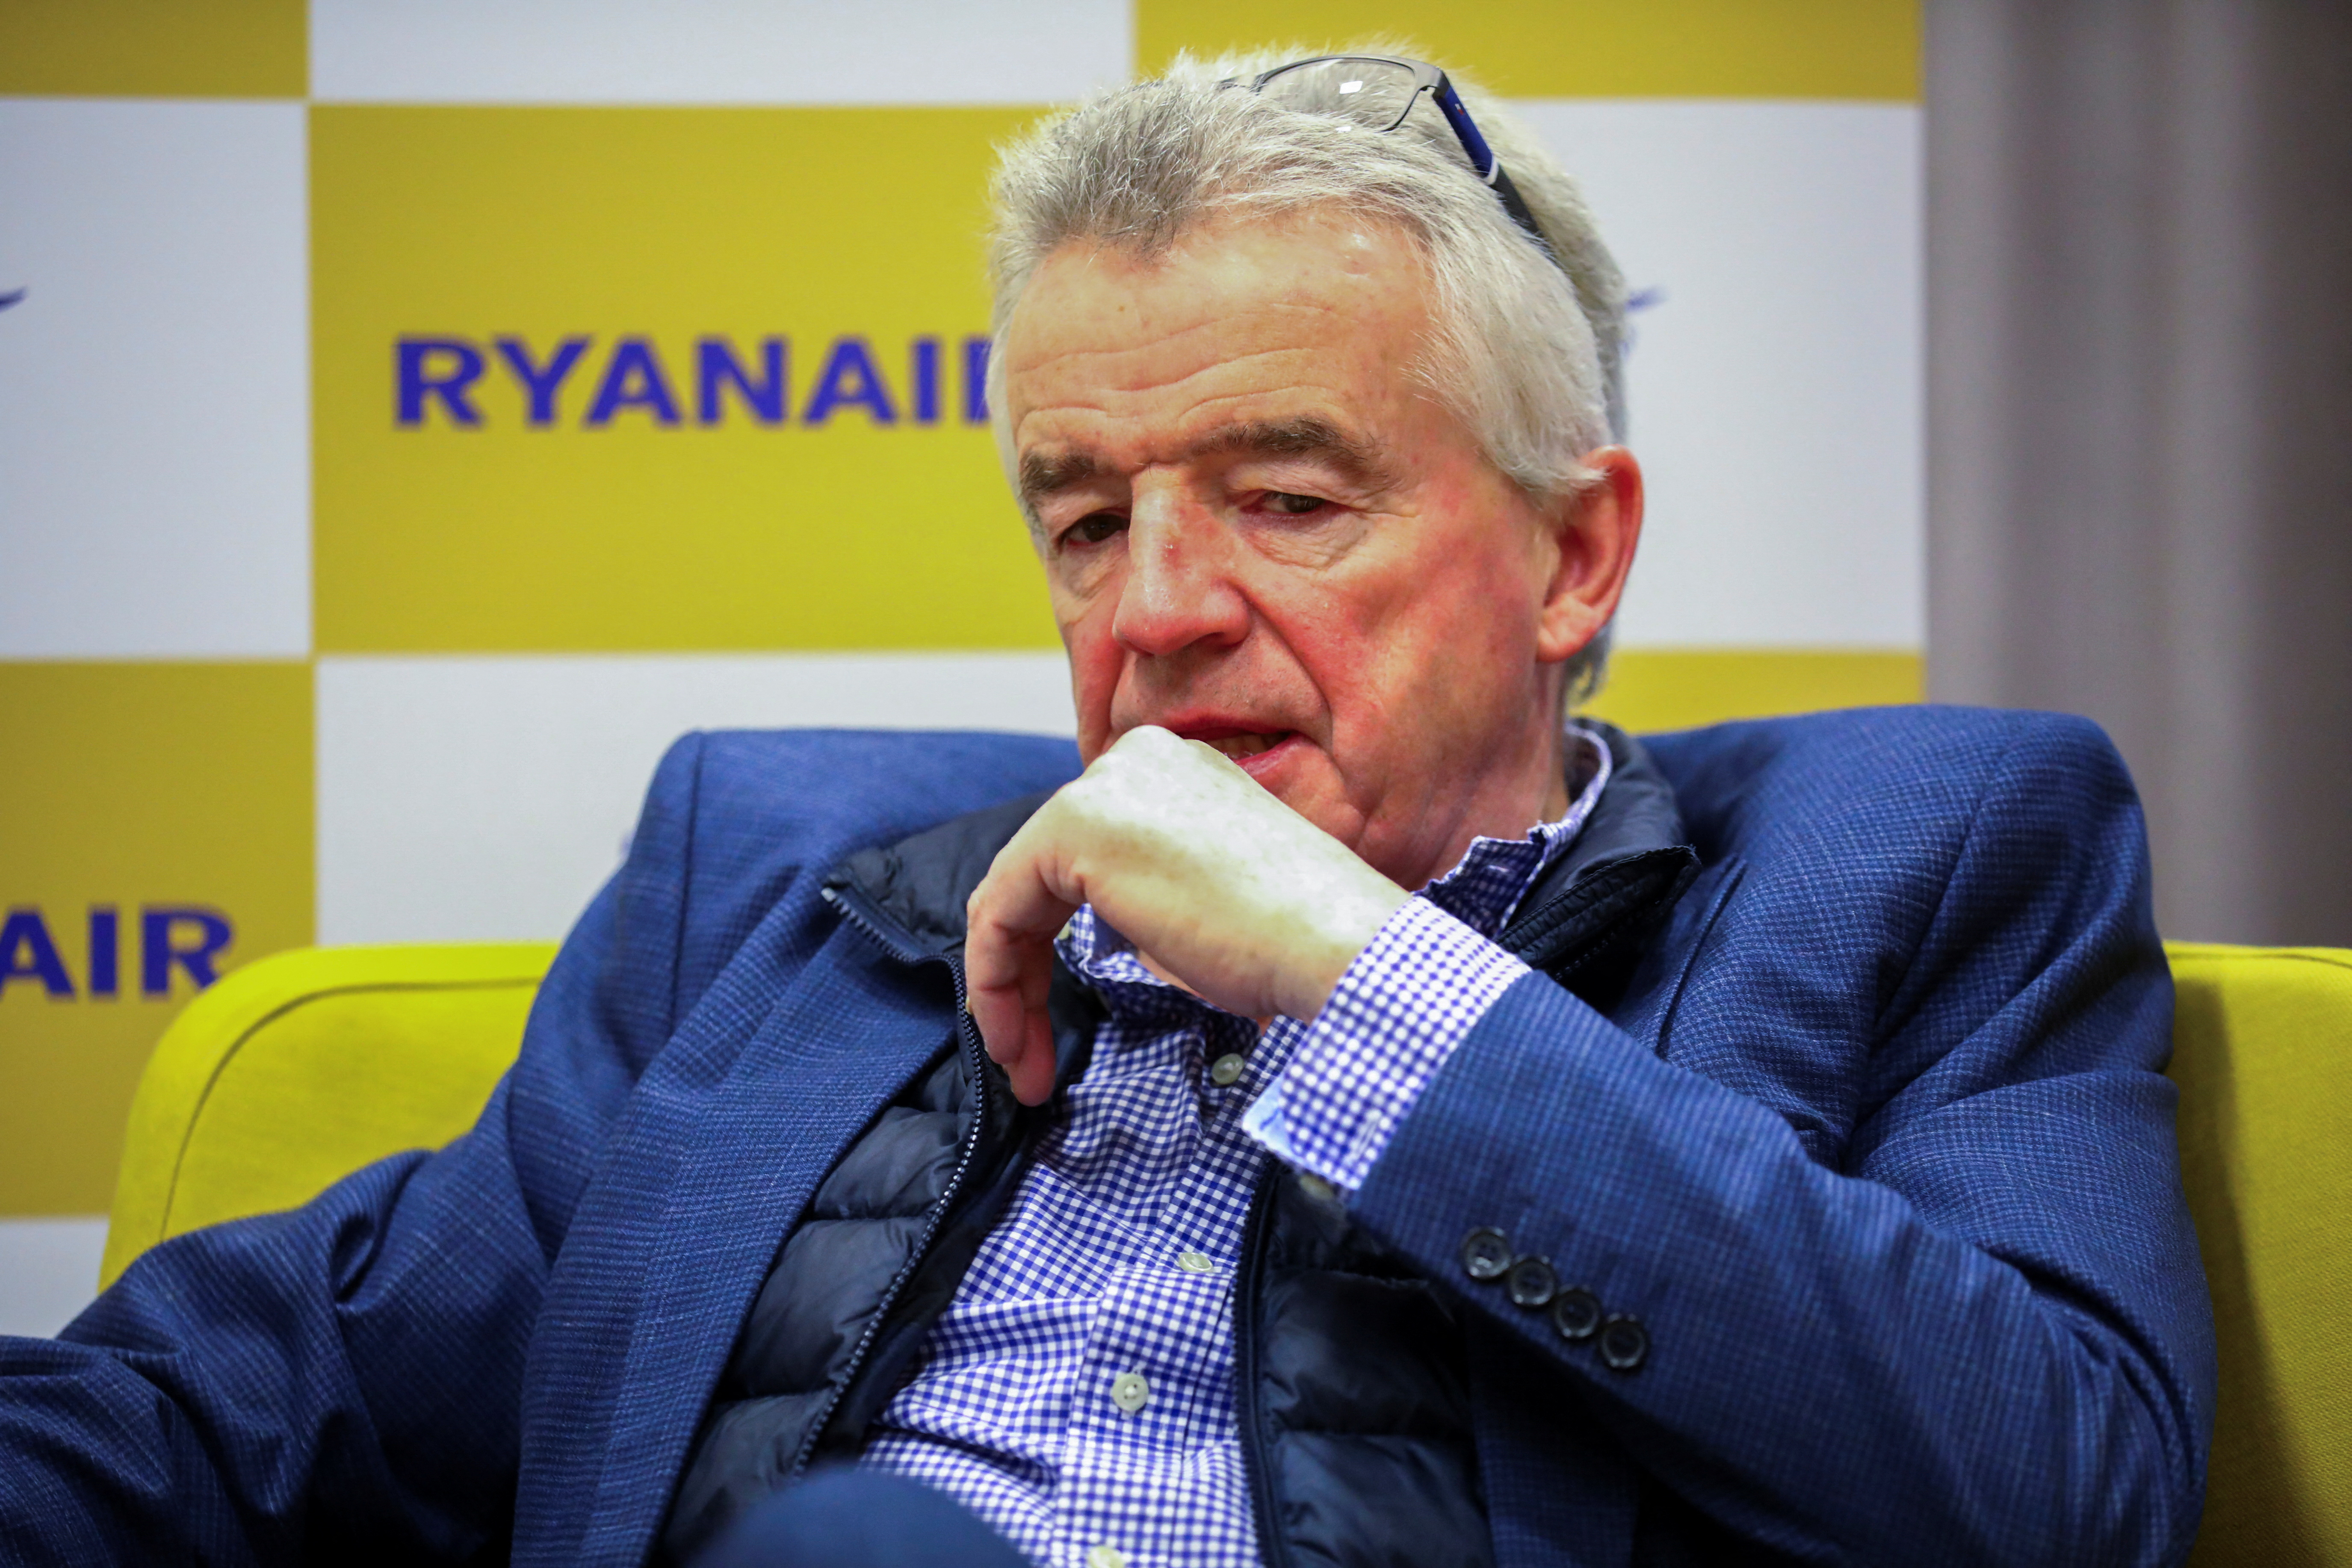 Ryanair's Group CEO Michael O'Leary attends a Reuters TV interview in Berlin